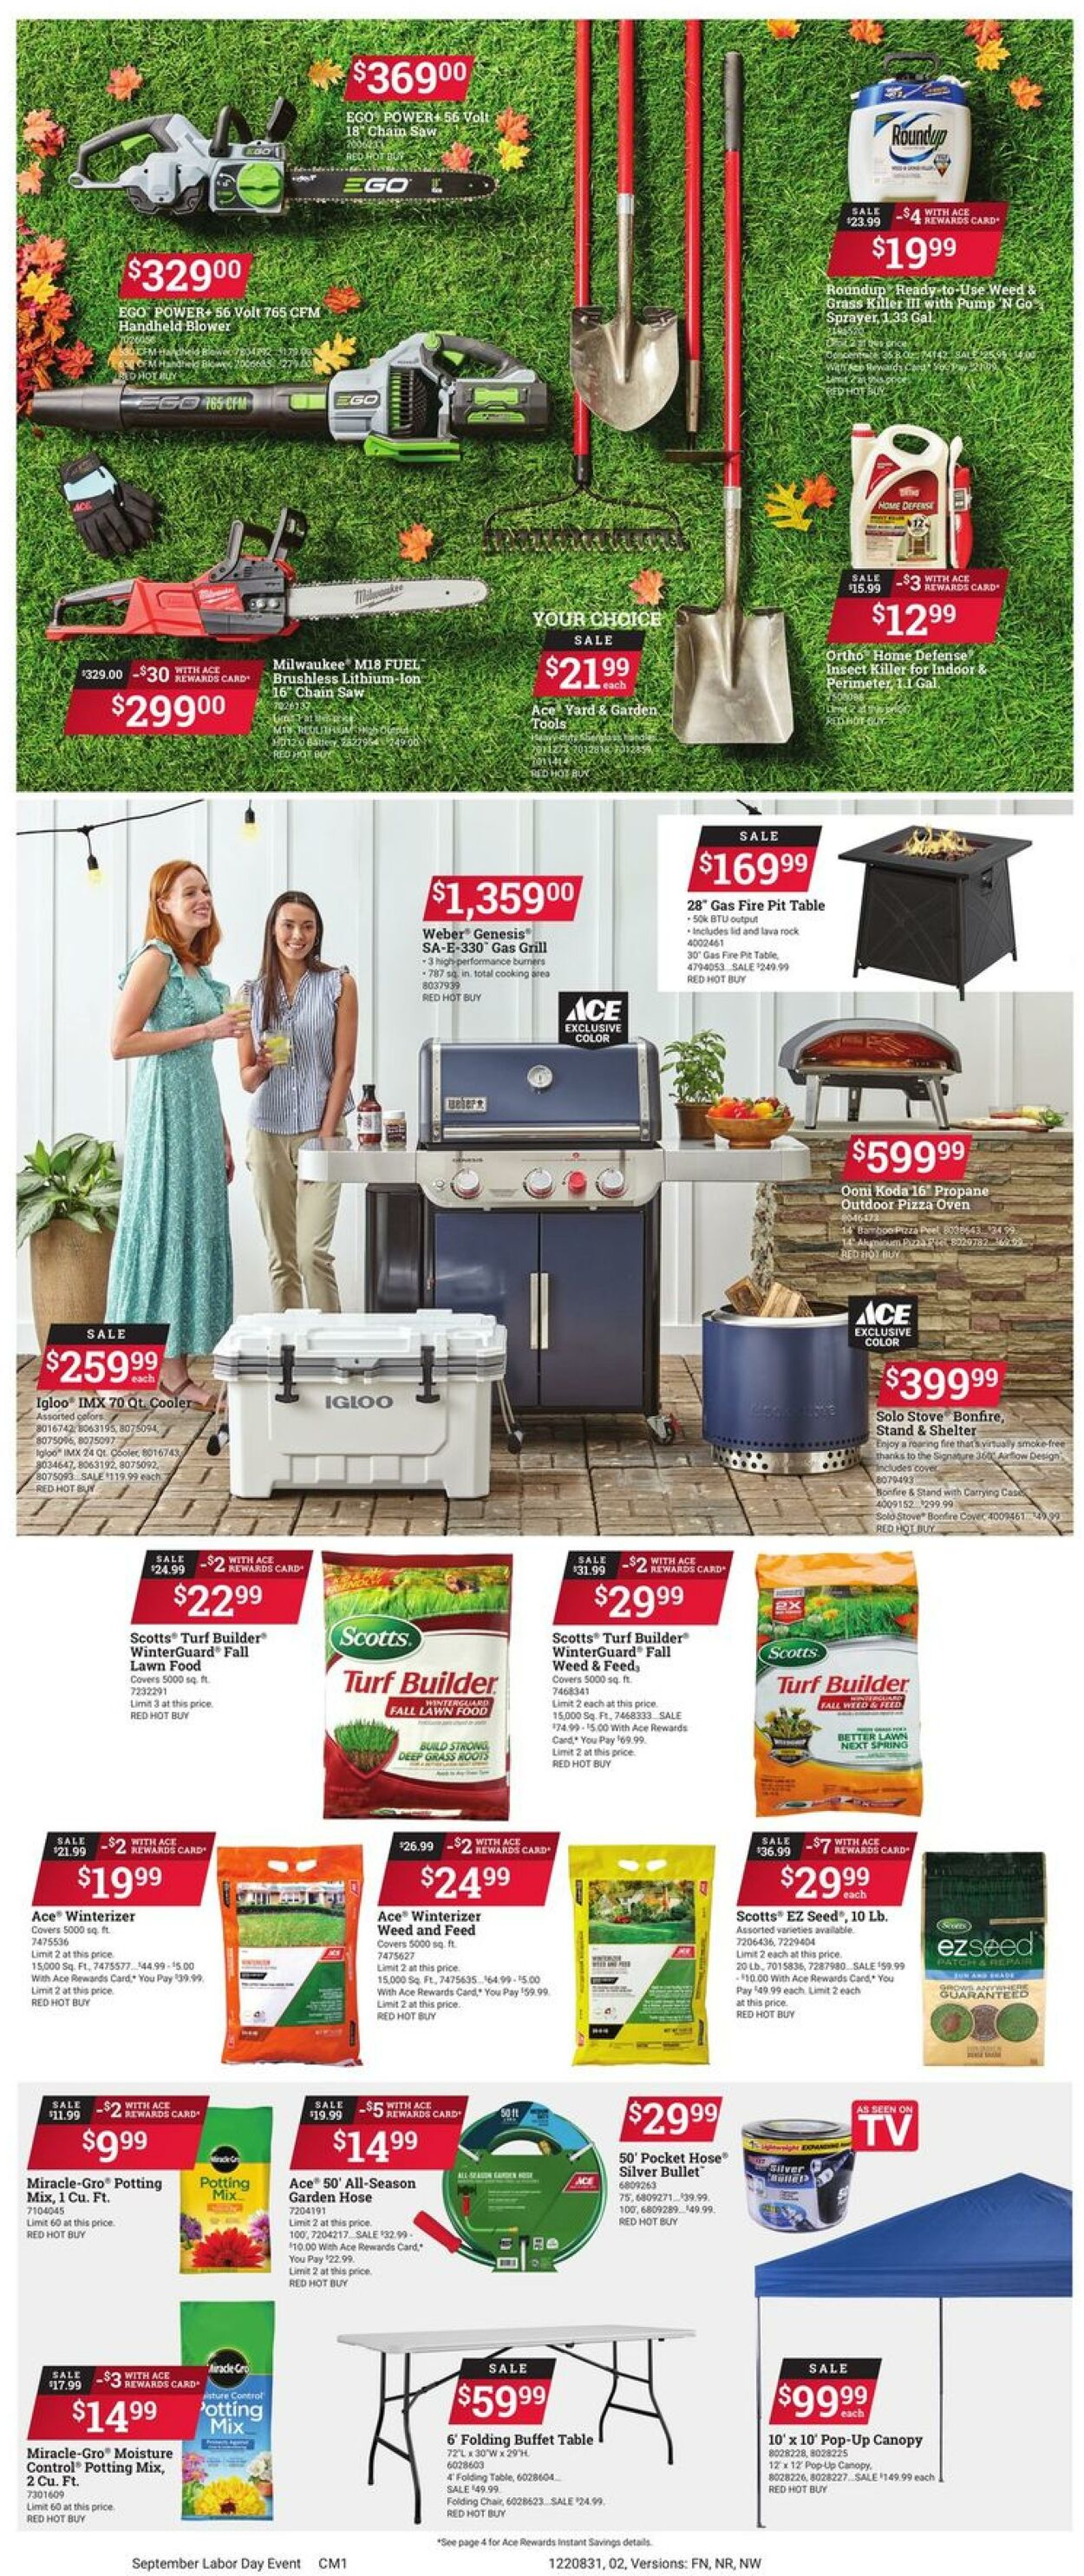 Weekly ad Ace Hardware 08/31/2022 - 09/12/2022